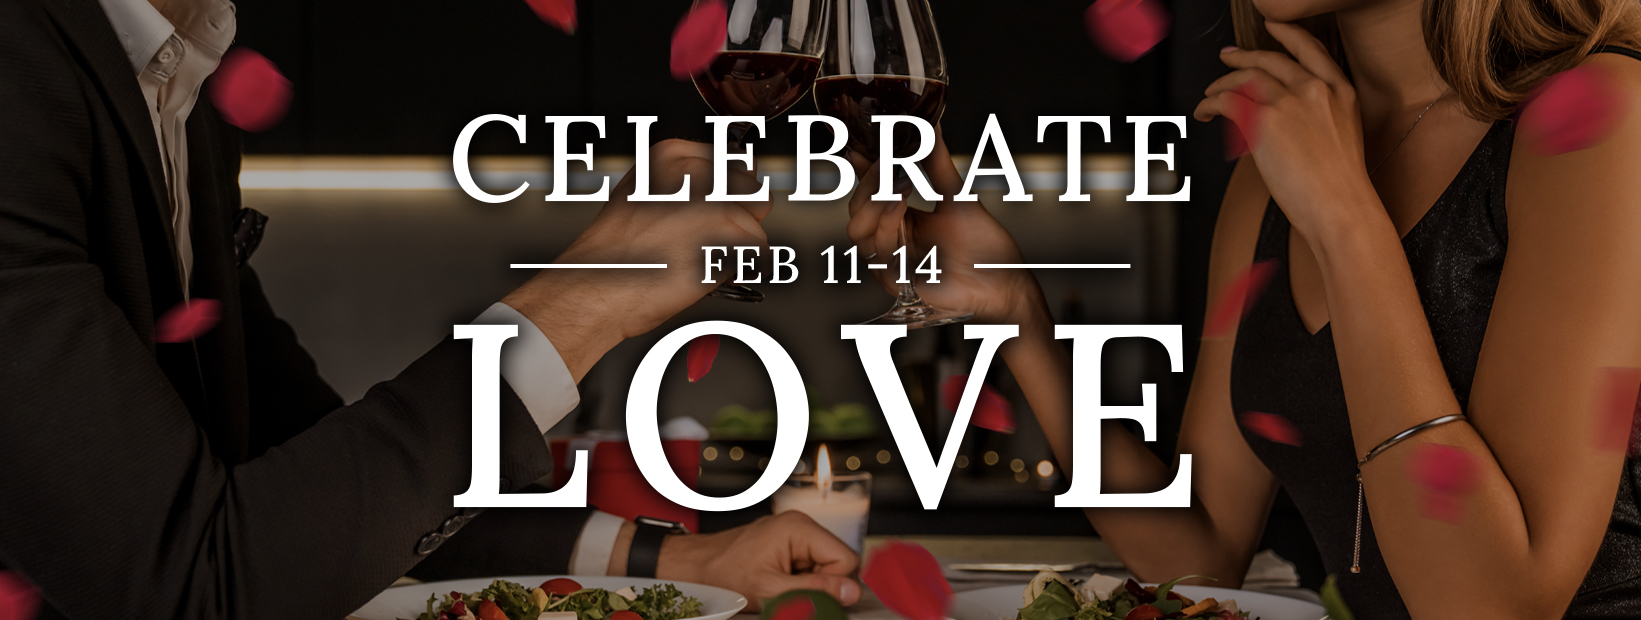 Unlock your heart at Via Brasil's Valentine's Dinners! Indulge in